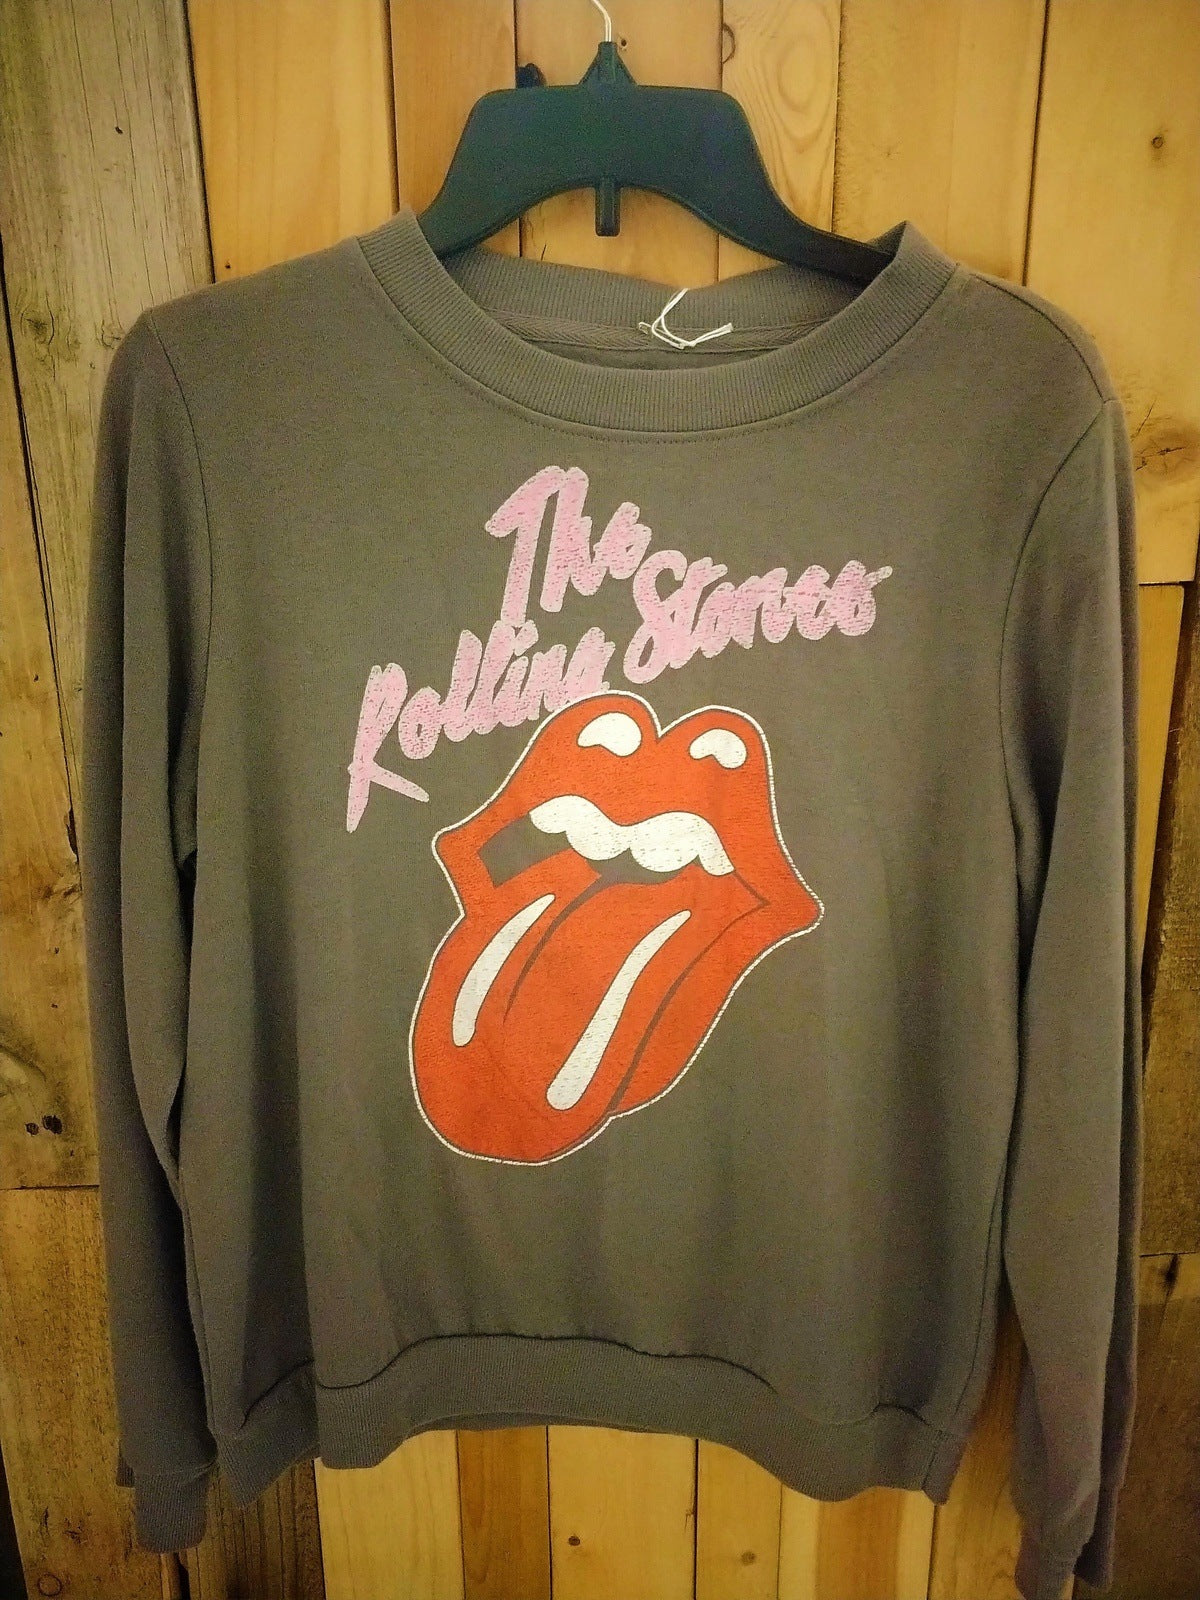 Rolling Stones Official Merchandise Sweatshirt Size Medium As Is 332135WH